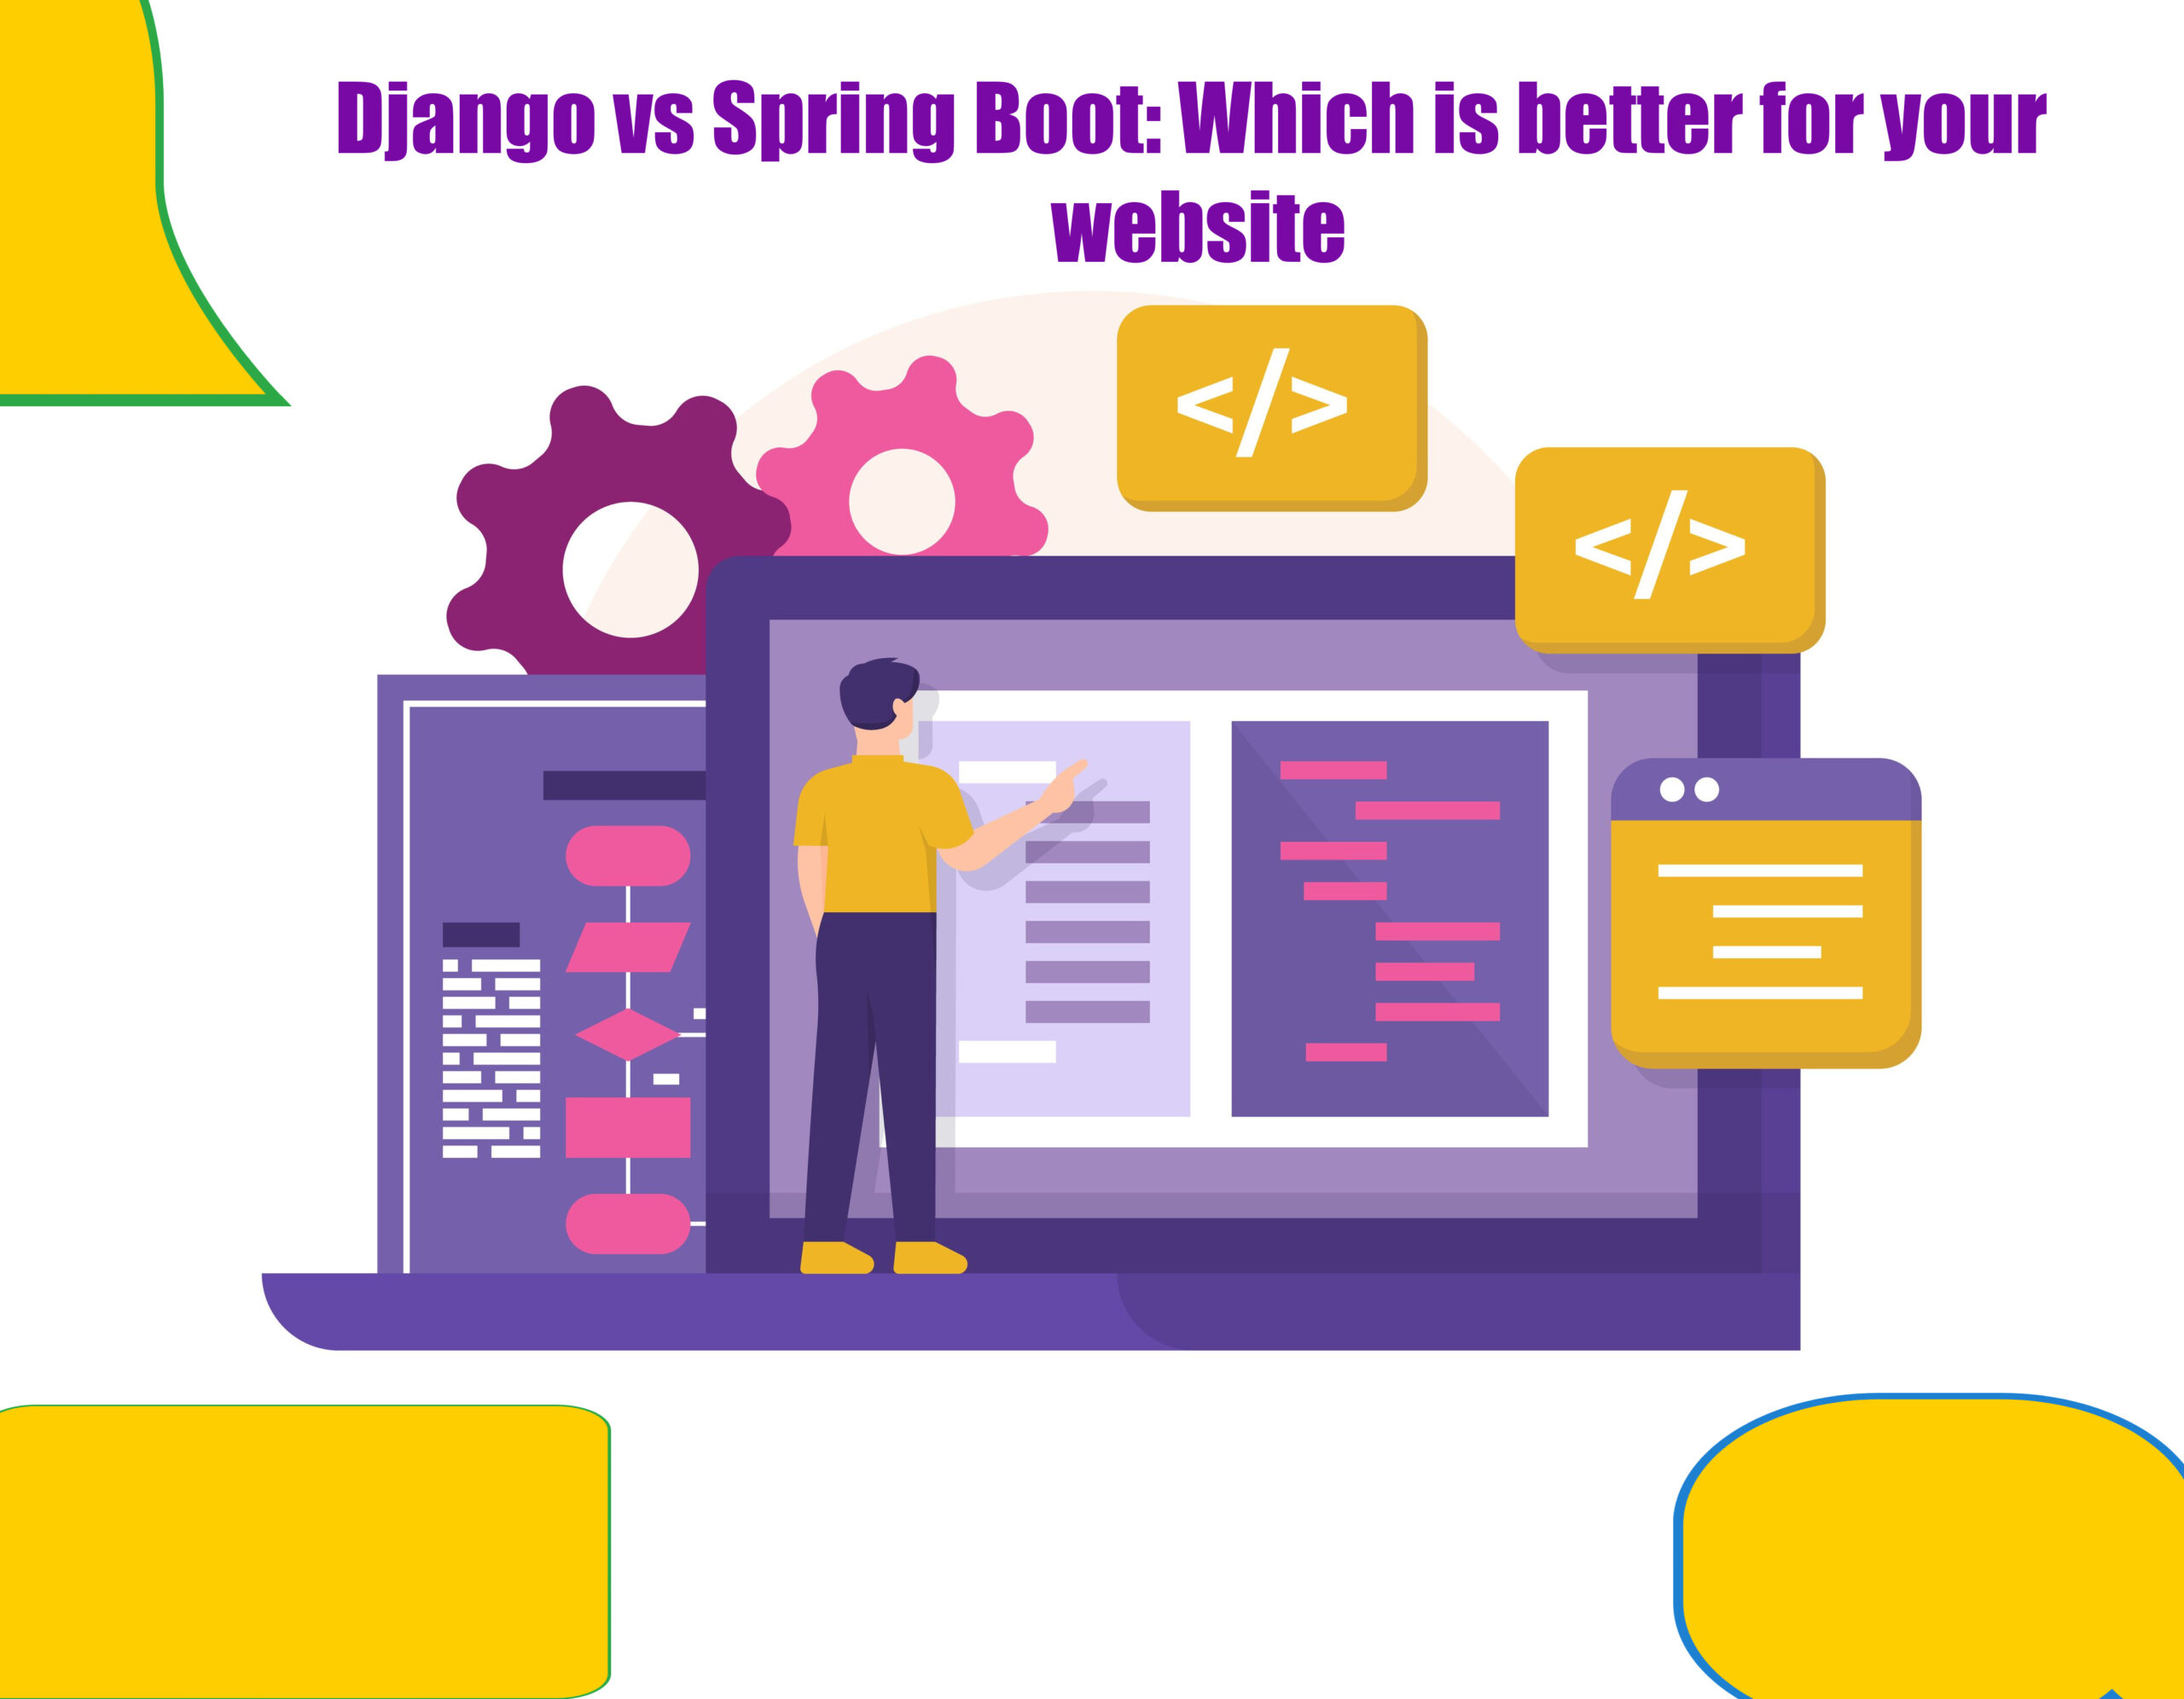 Django vs Spring Boot: Which is Better for Your Website